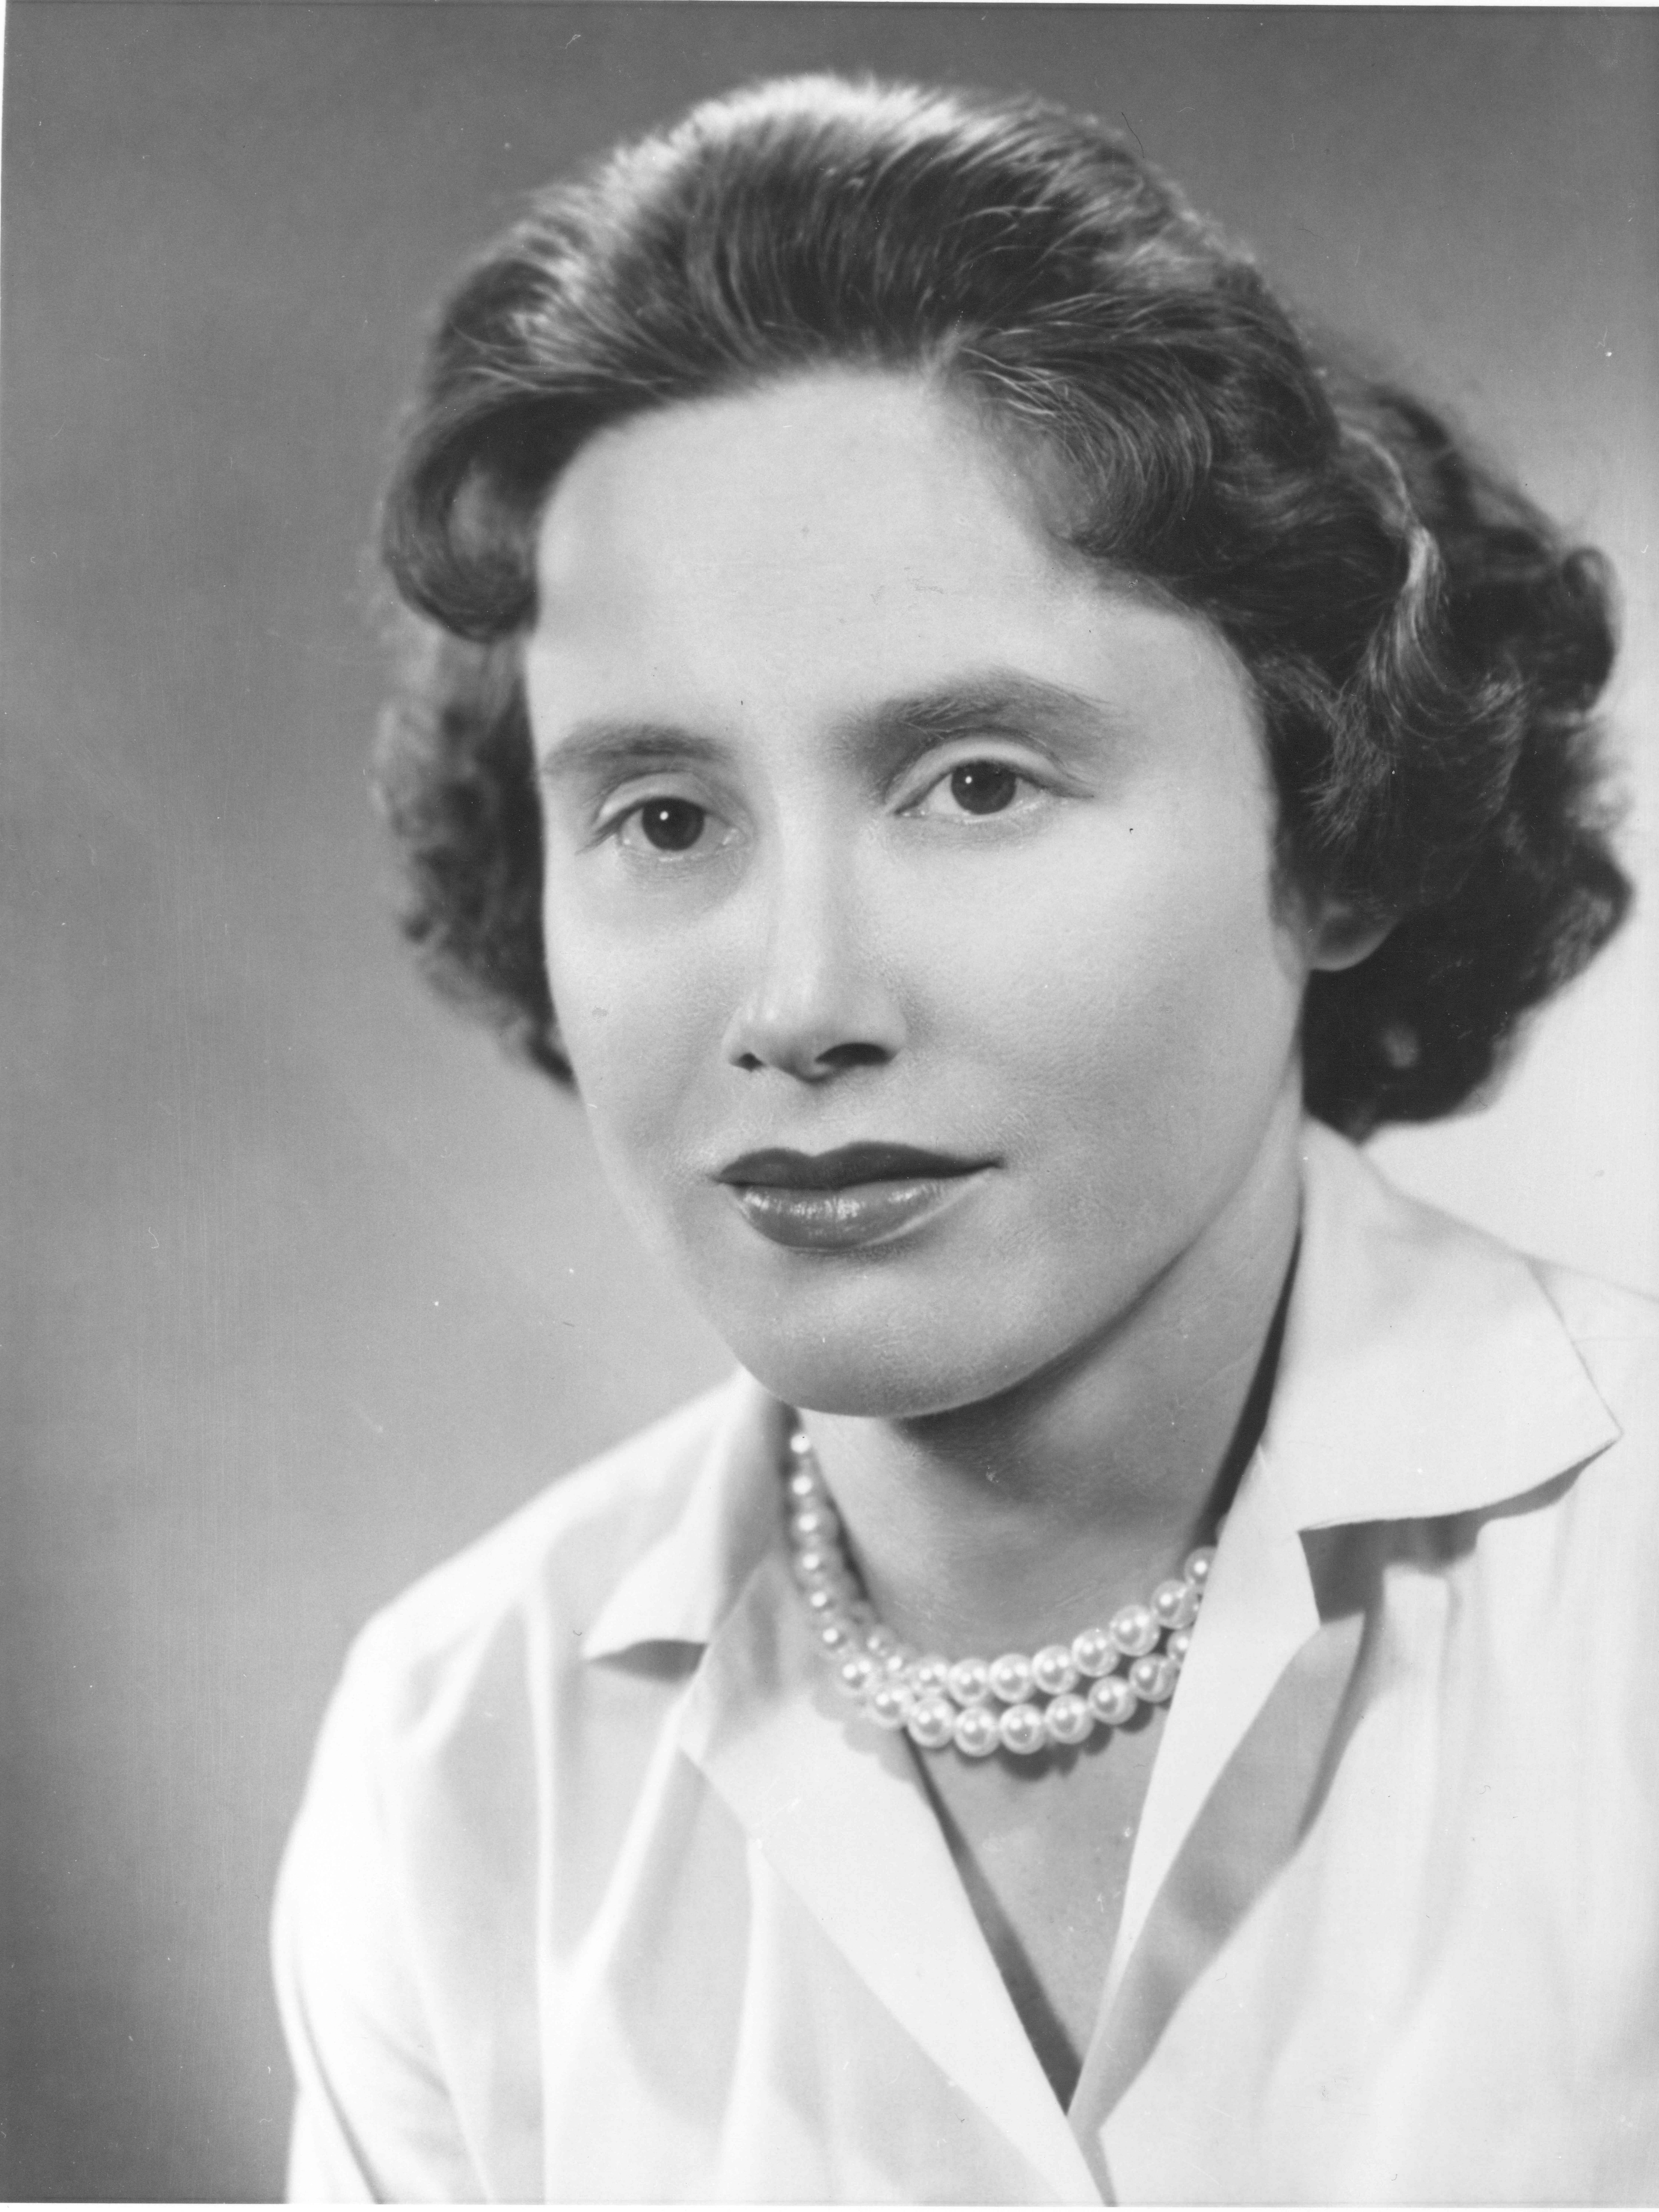 A black and white photo of a woman with curled short hair wearing a pearl necklace and a collared white shirt